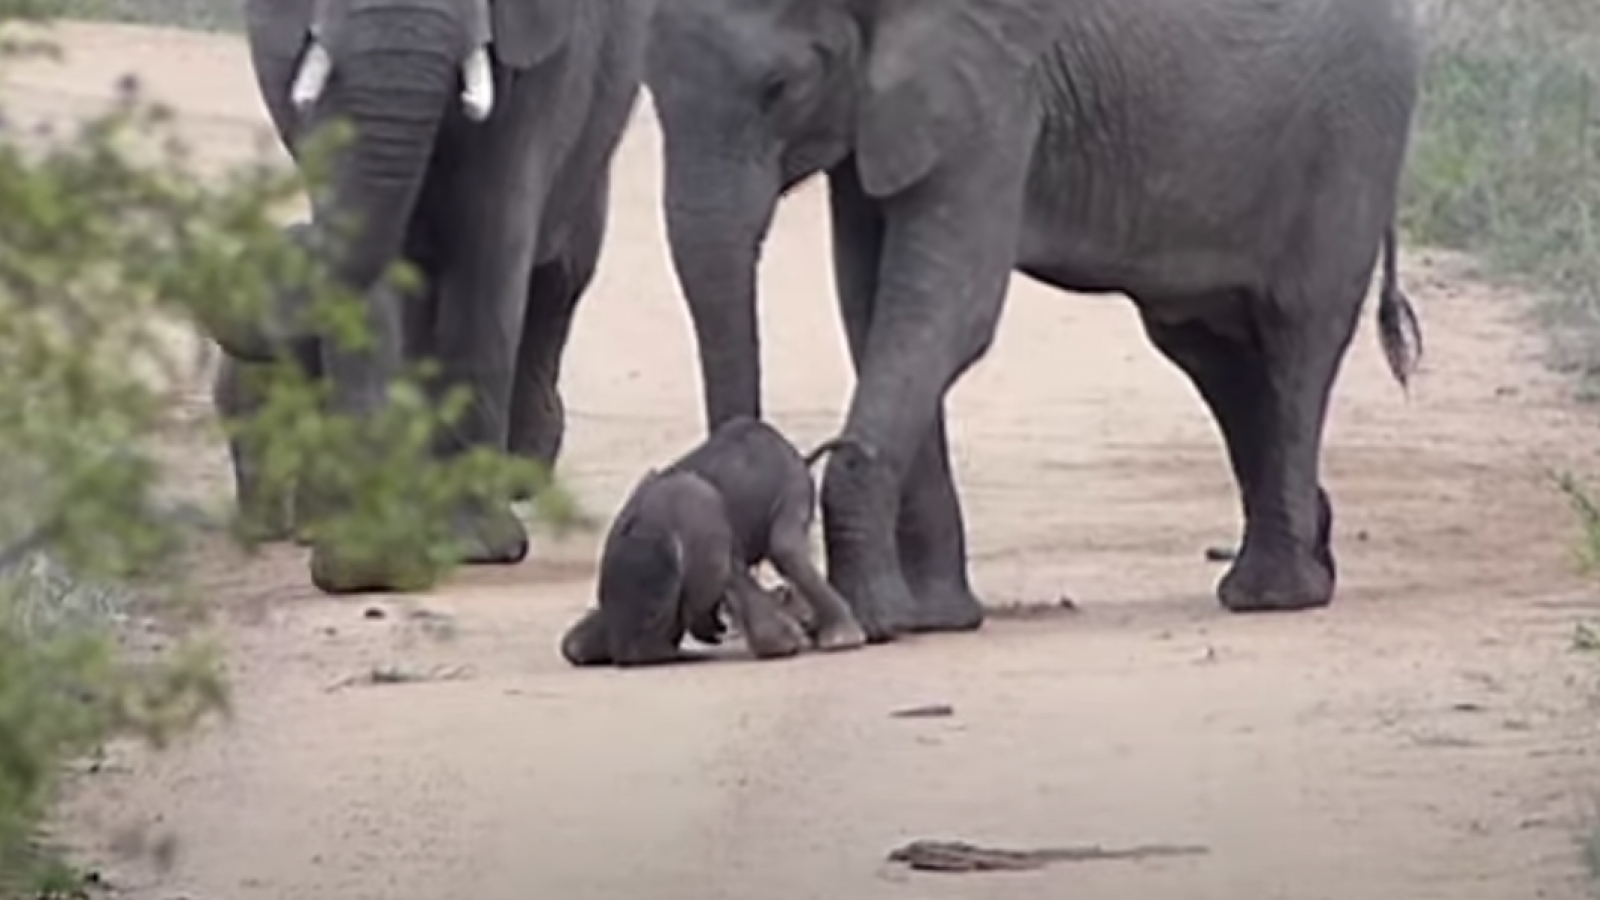 Watch Baby Elephant Takes Its First Steps With Help From Its Mom in Adorable Video